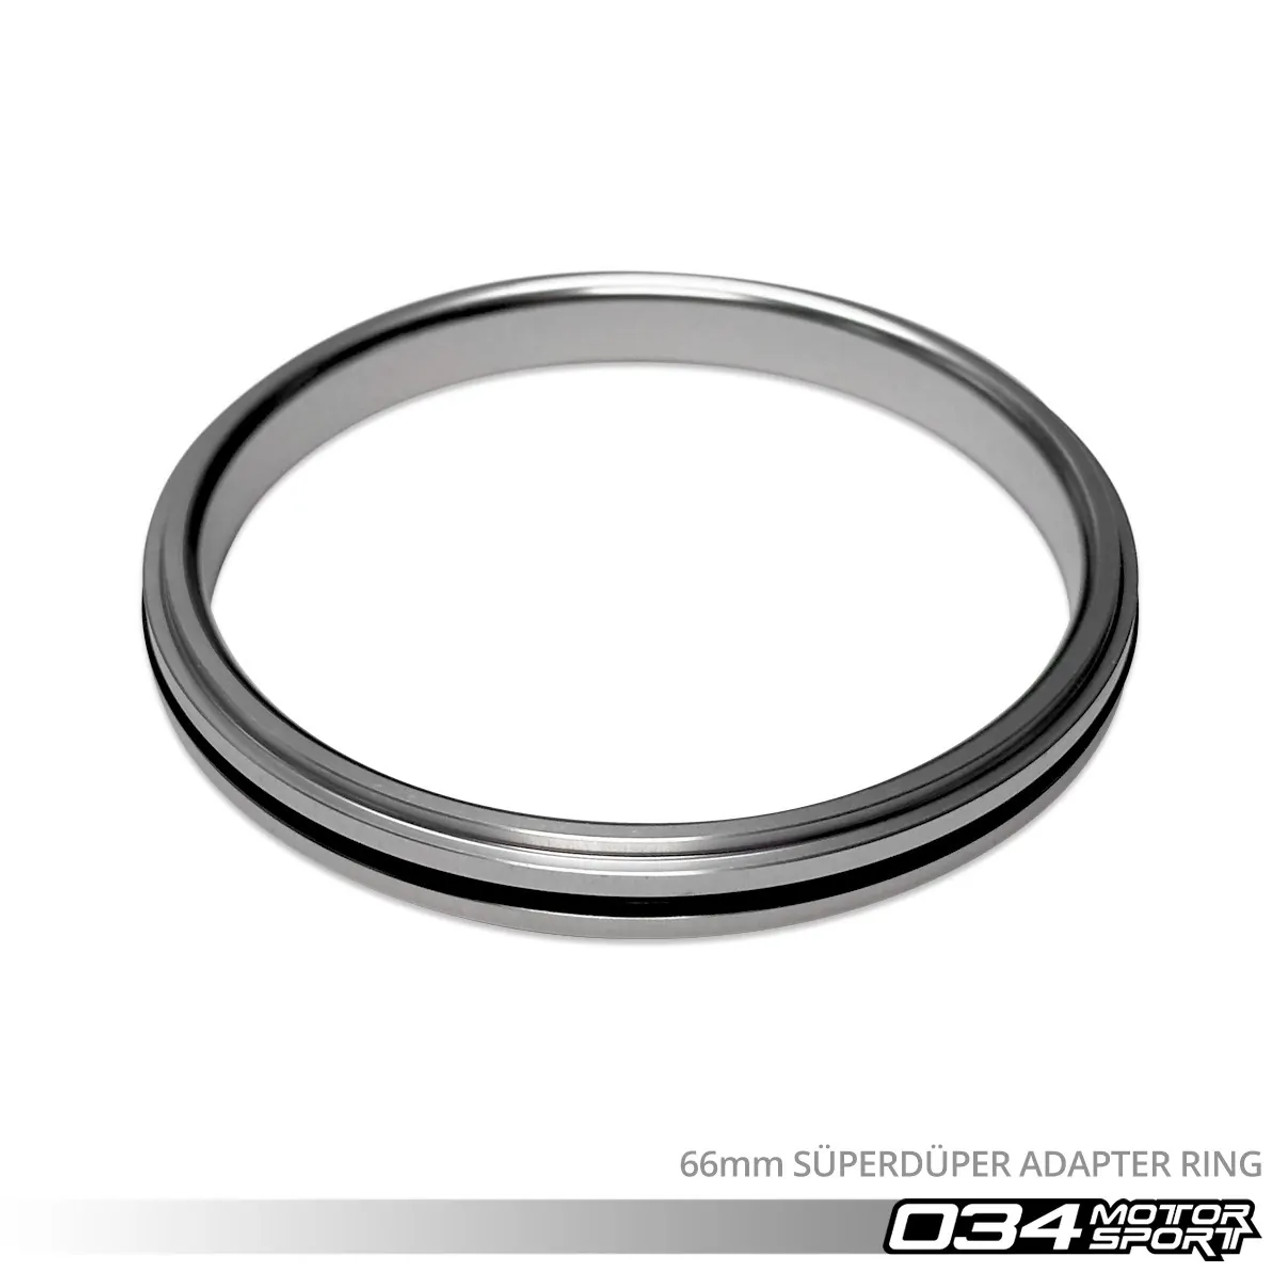 034Motorsport Turbo Inlet Adapter Rings for B9 3.0T